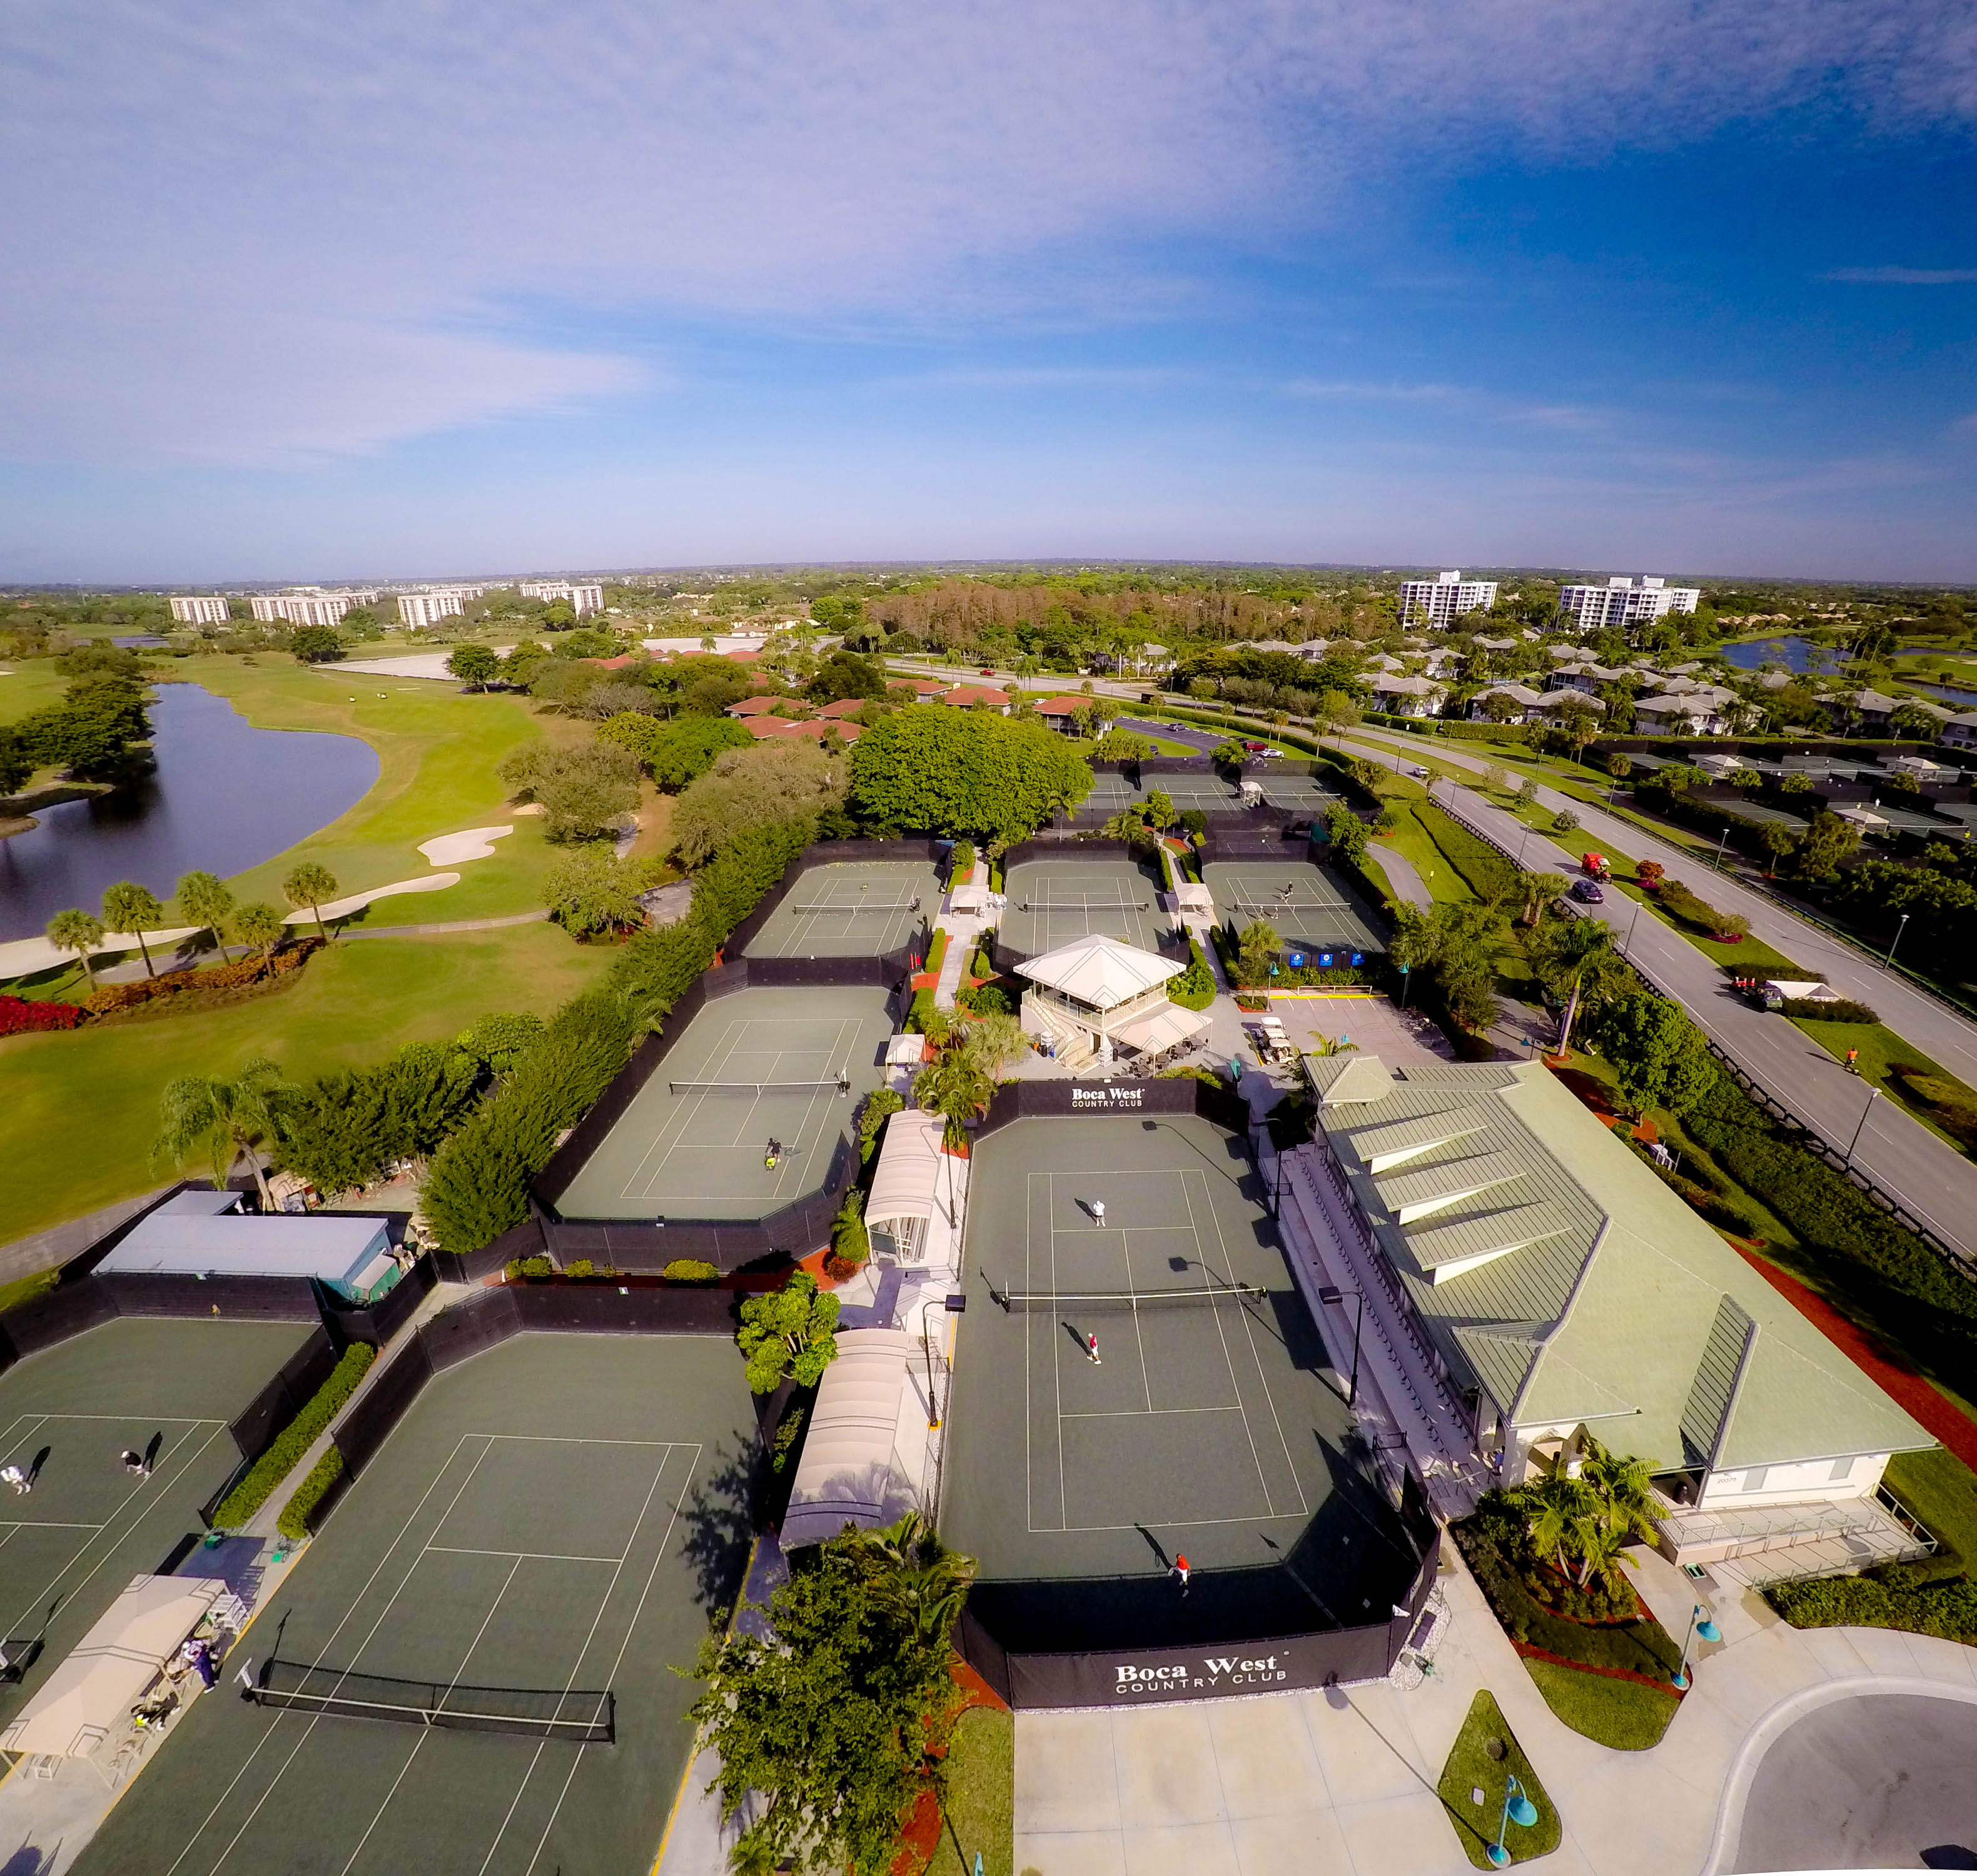 Aerial view of the Tennis Center at Boca West Country Club